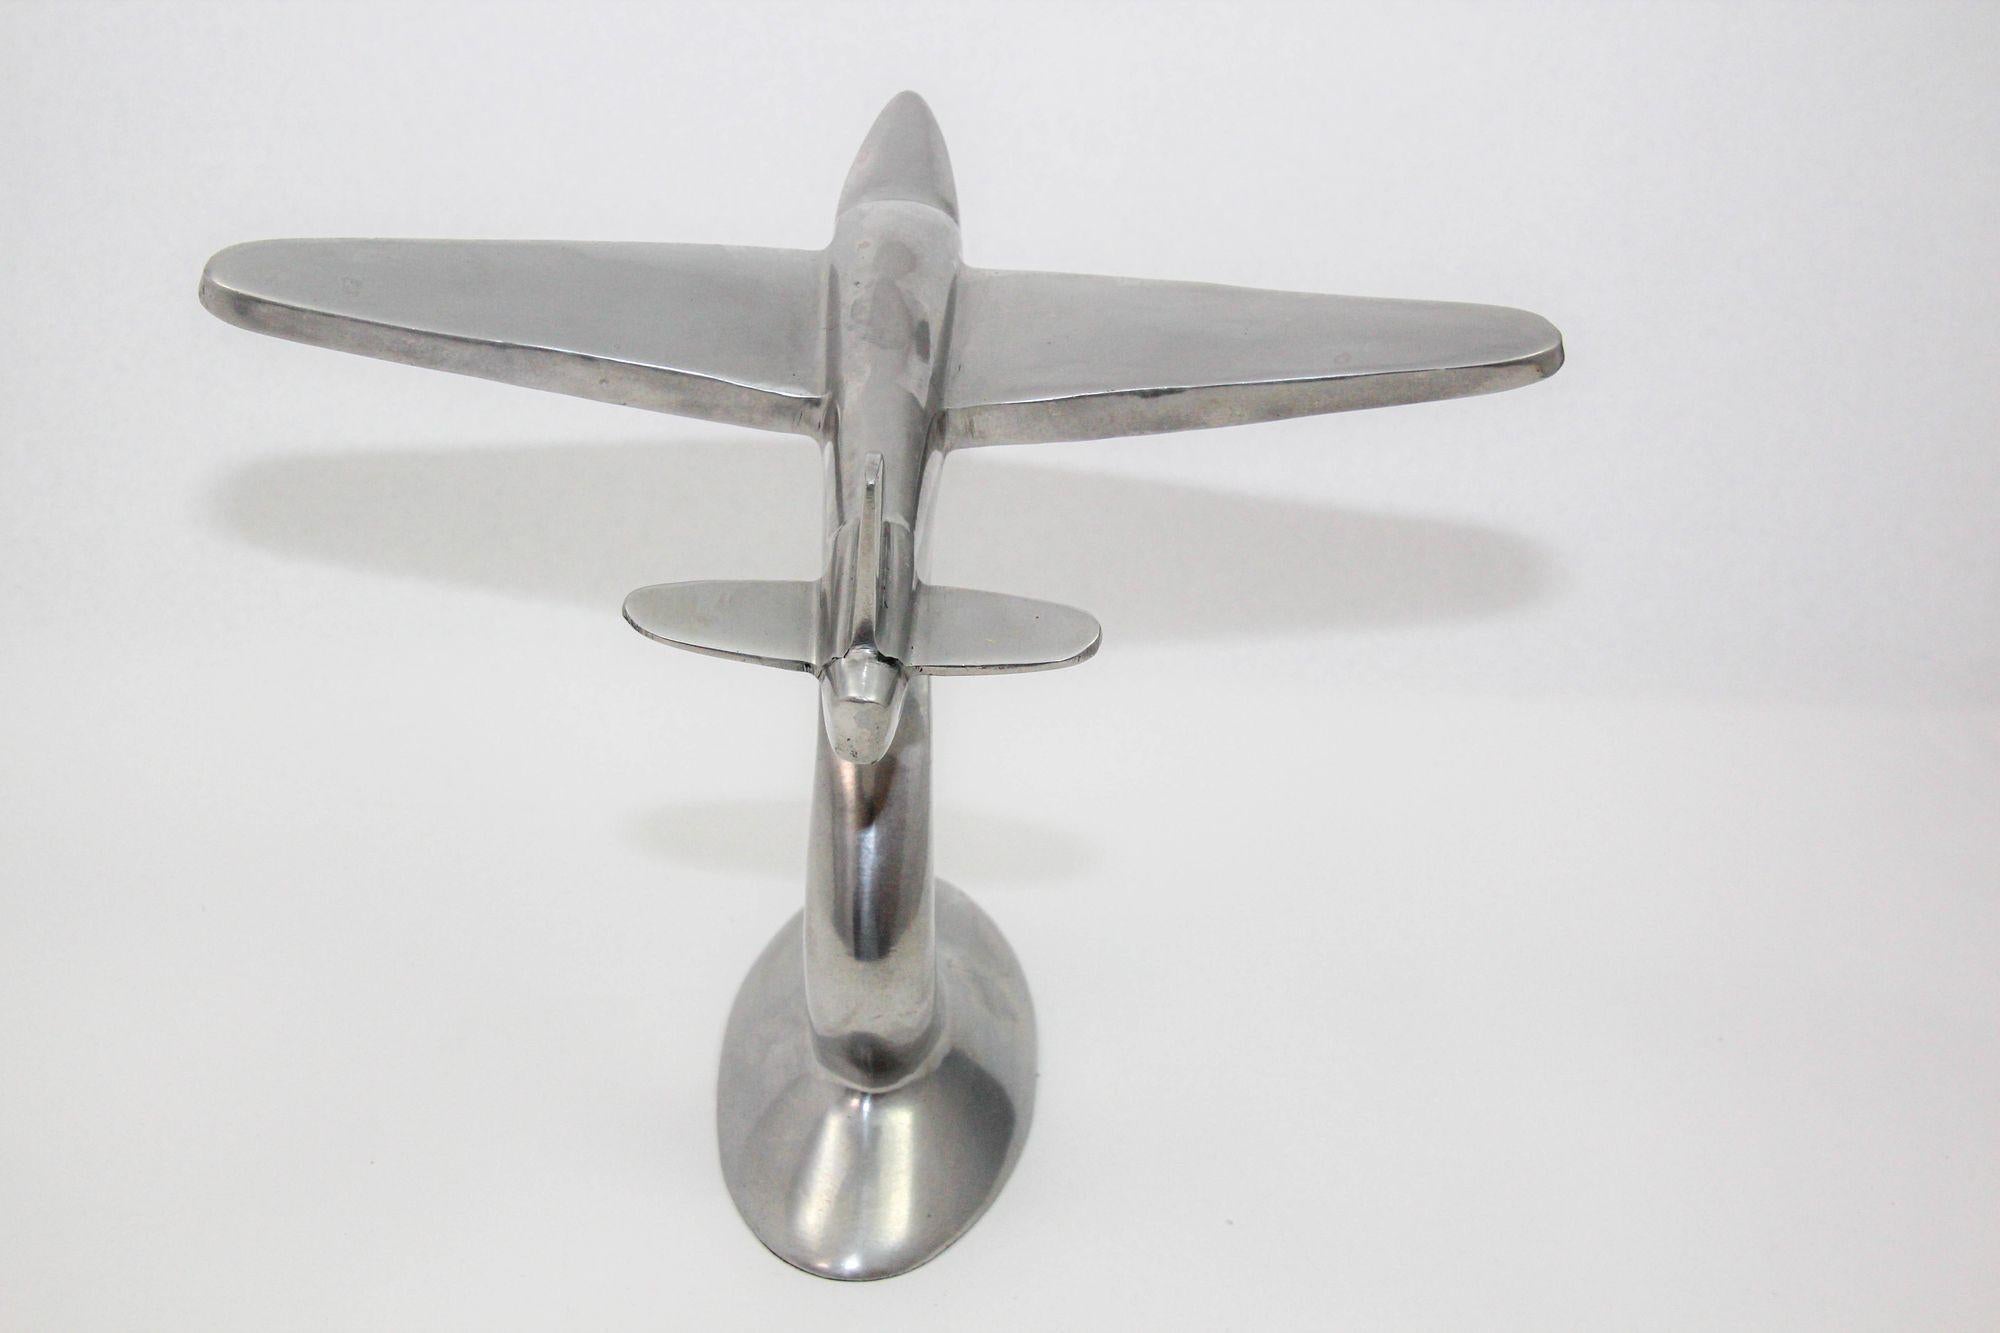 Art Deco Airplane Sculpture of the Boeing 314 Clipper Cast Aluminium In Good Condition For Sale In North Hollywood, CA